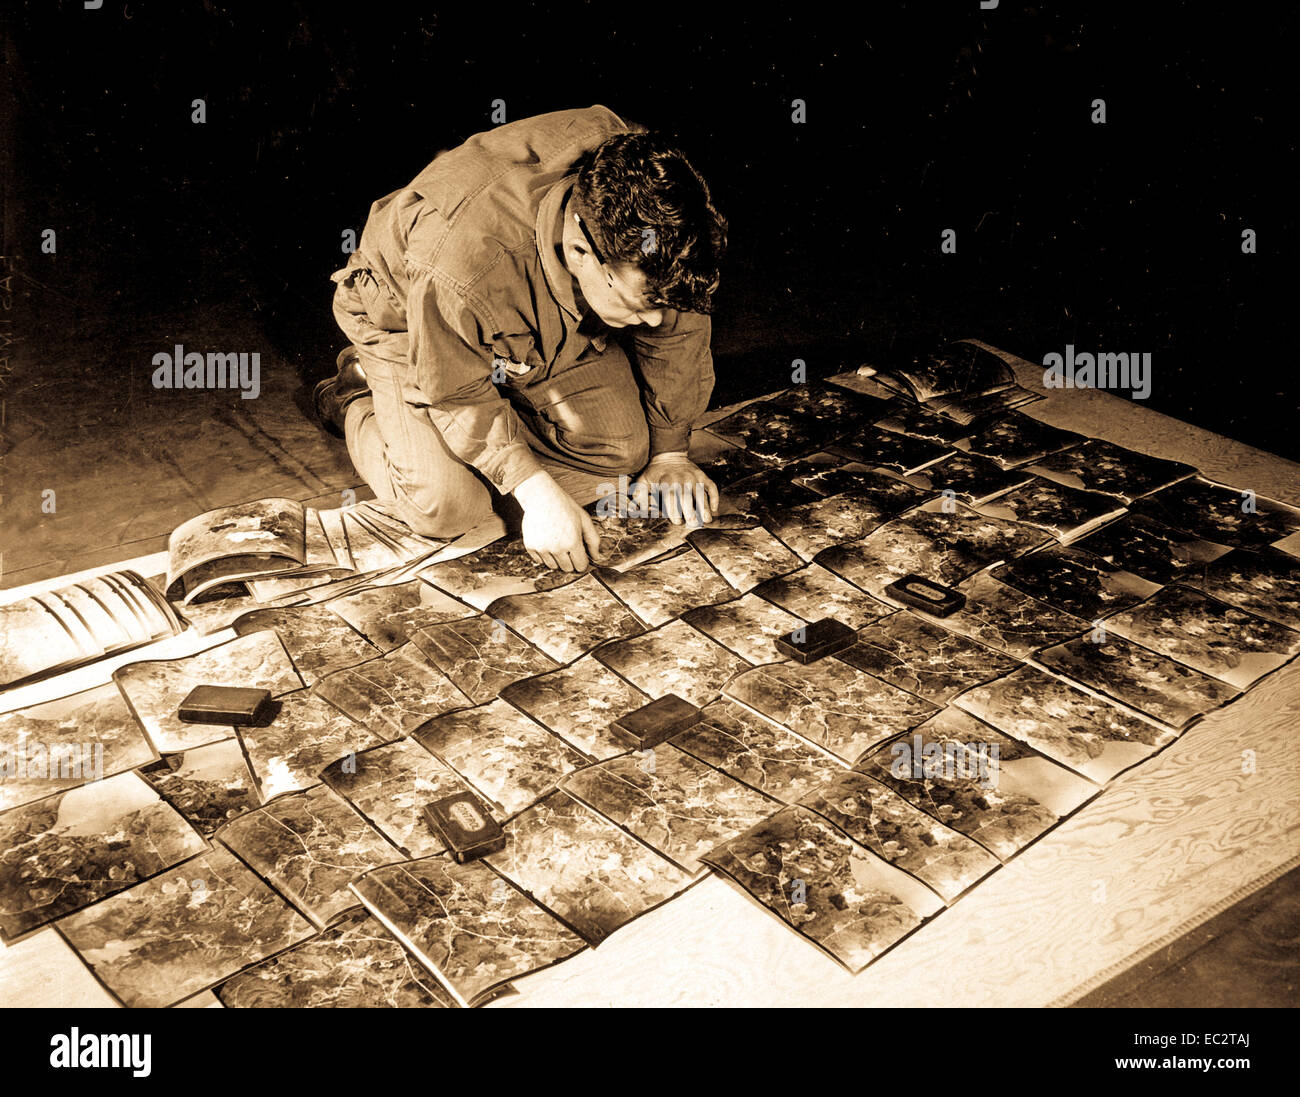 T/3 James Ellis, Ehrenfeld, Pa., laying out the photographs to check their sequence.  660th Engineers, Kew Gardens, England.  January 11, 1943.  Photo by Ham.  (Army) Stock Photo